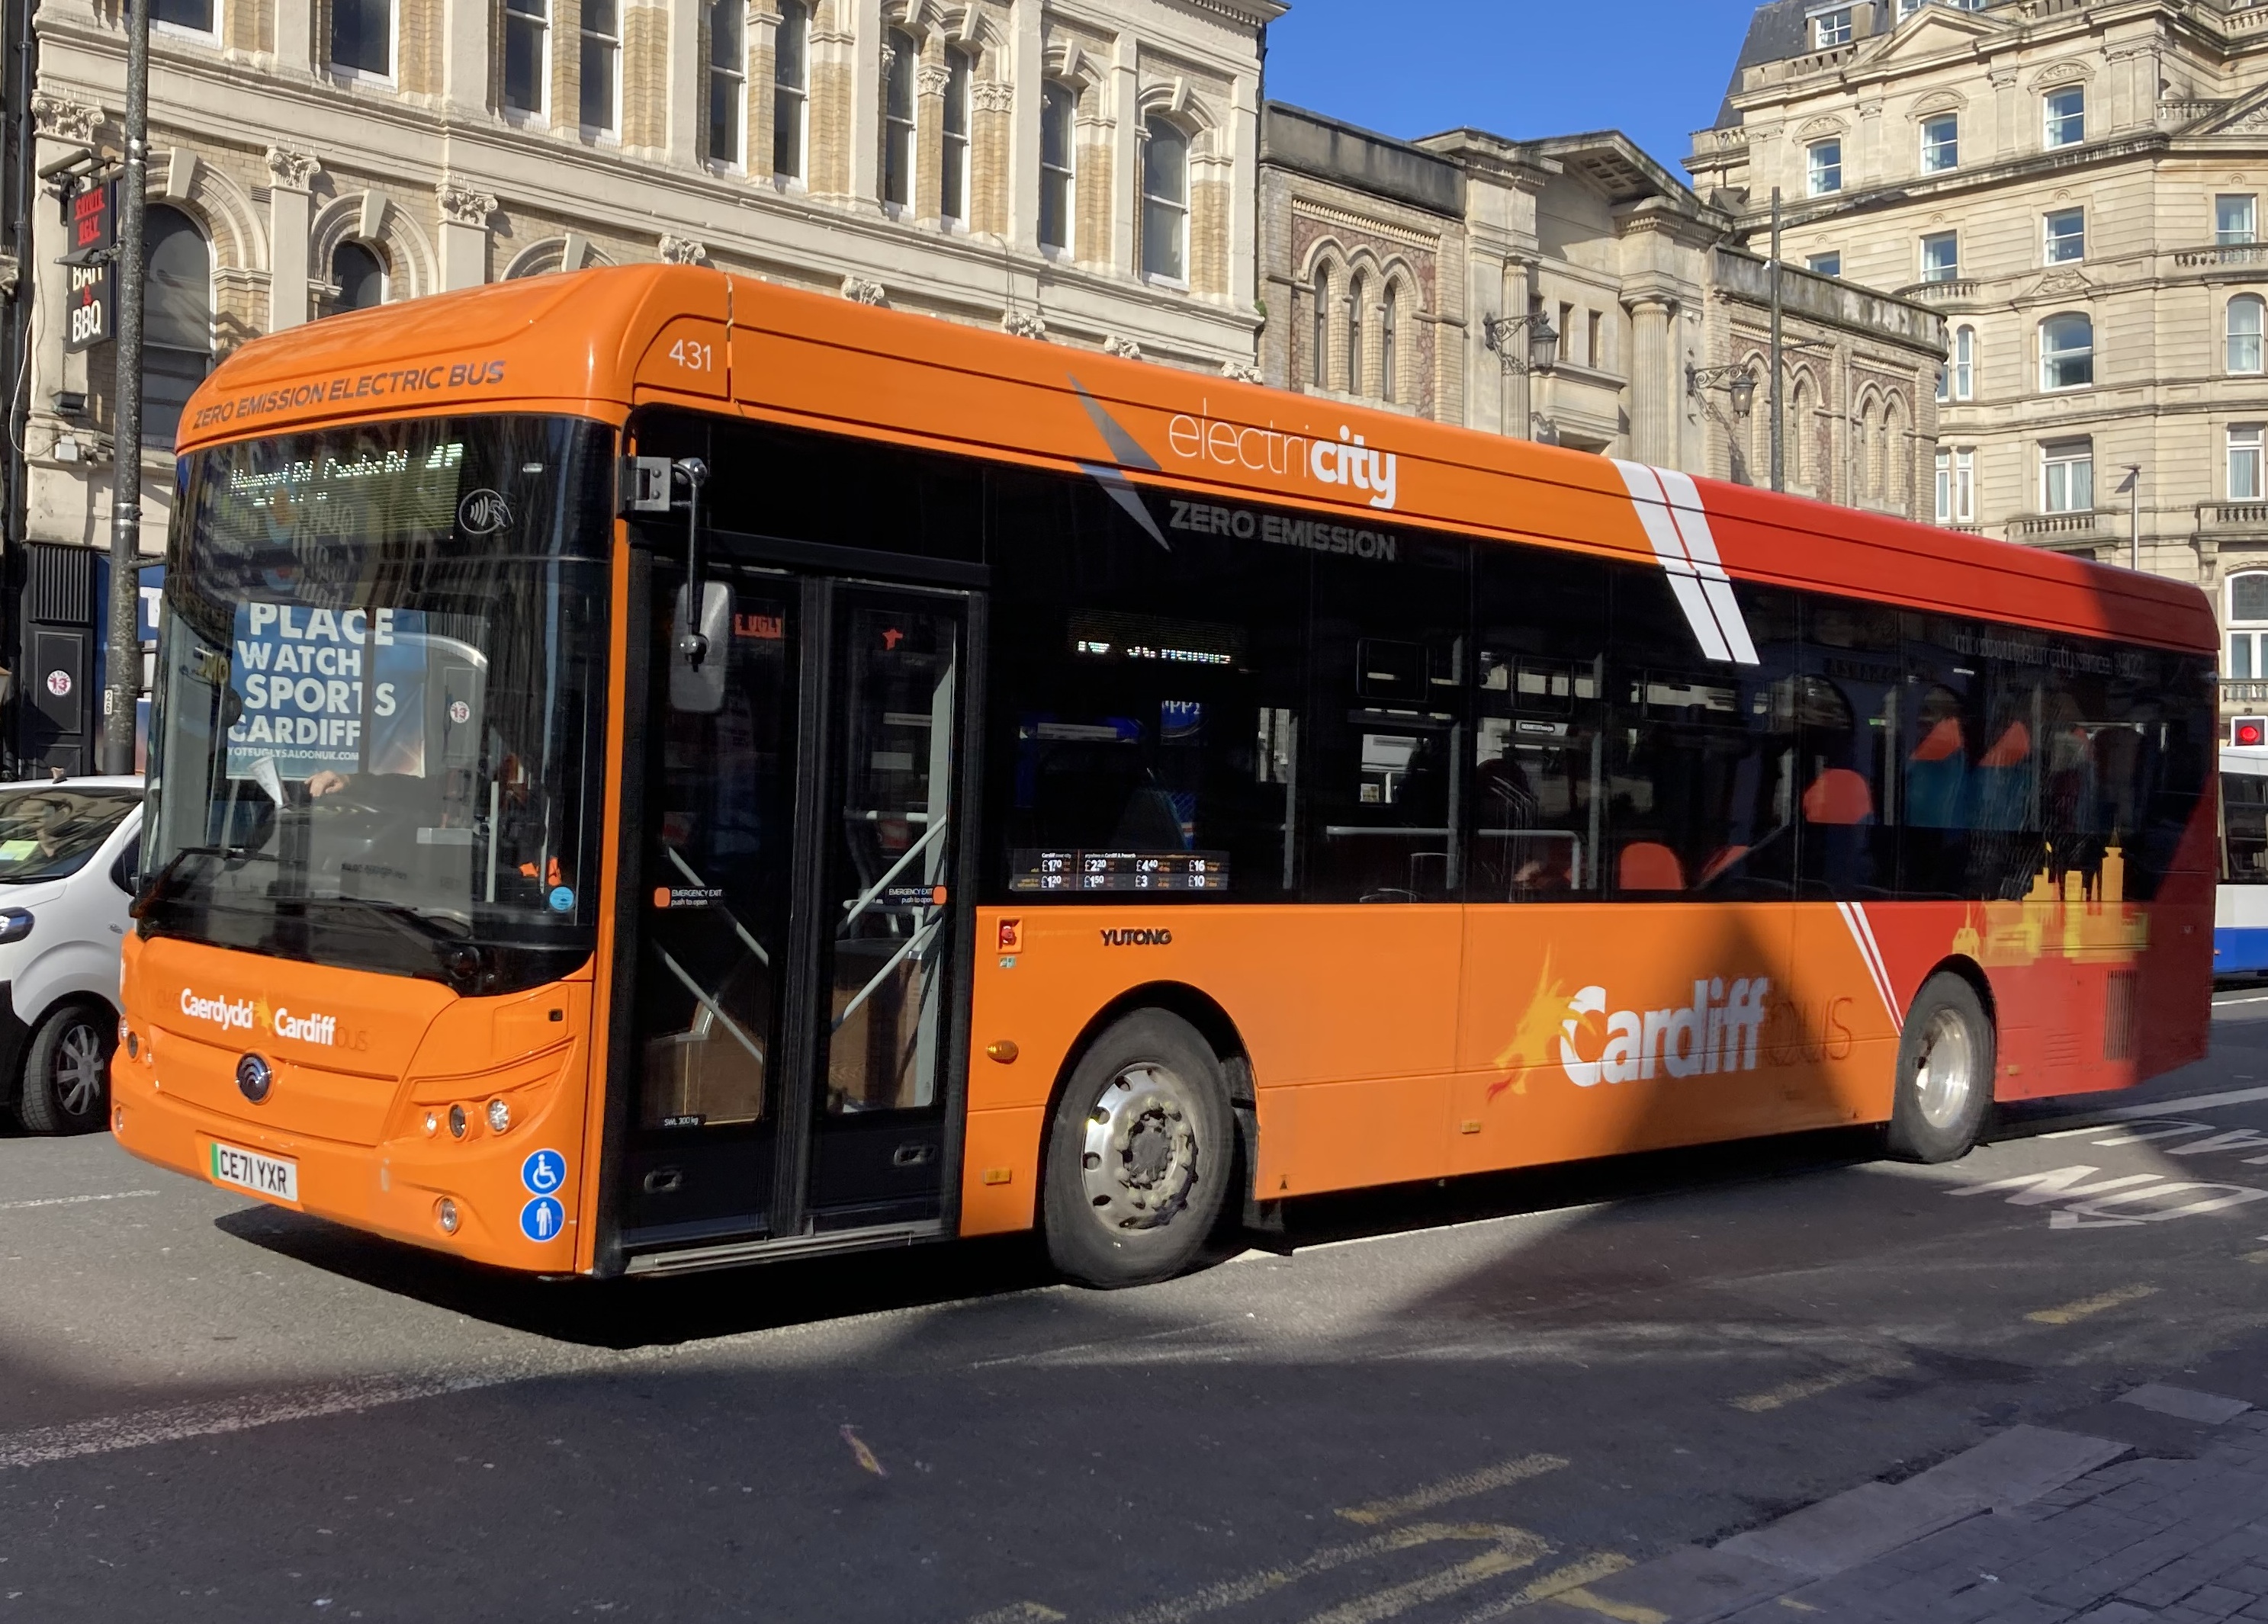 https://upload.wikimedia.org/wikipedia/commons/a/a8/Cardiff_Bus_in_St_Mary_Street%2C_Cardiff._April_2023.jpg